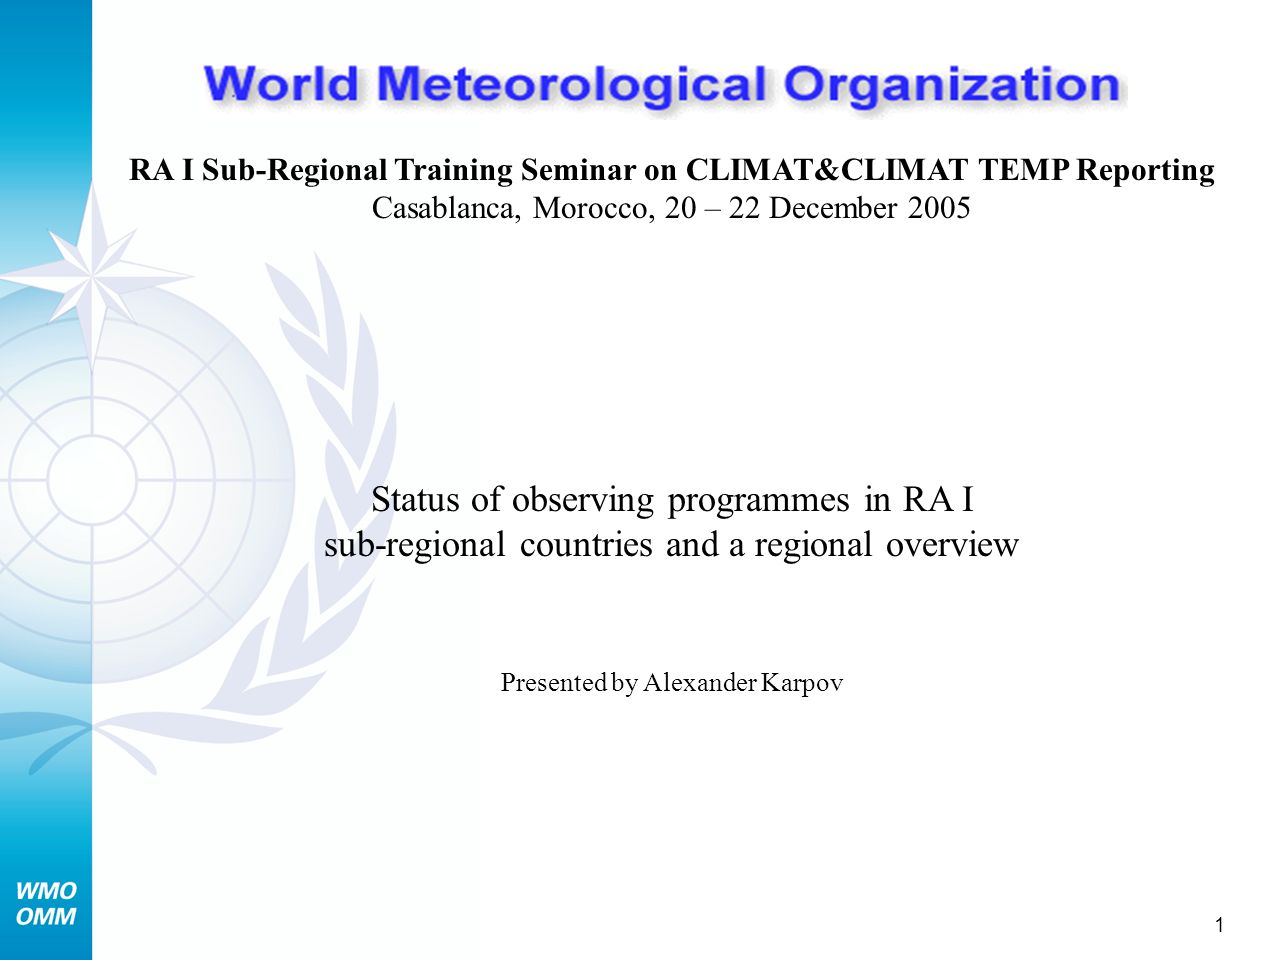 1 RA I Sub-Regional Training Seminar on CLIMAT&CLIMAT TEMP Reporting Casablanca, Morocco, 20 – 22 December 2005 Status of observing programmes in RA I sub-regional countries and a regional overview Presented by Alexander Karpov